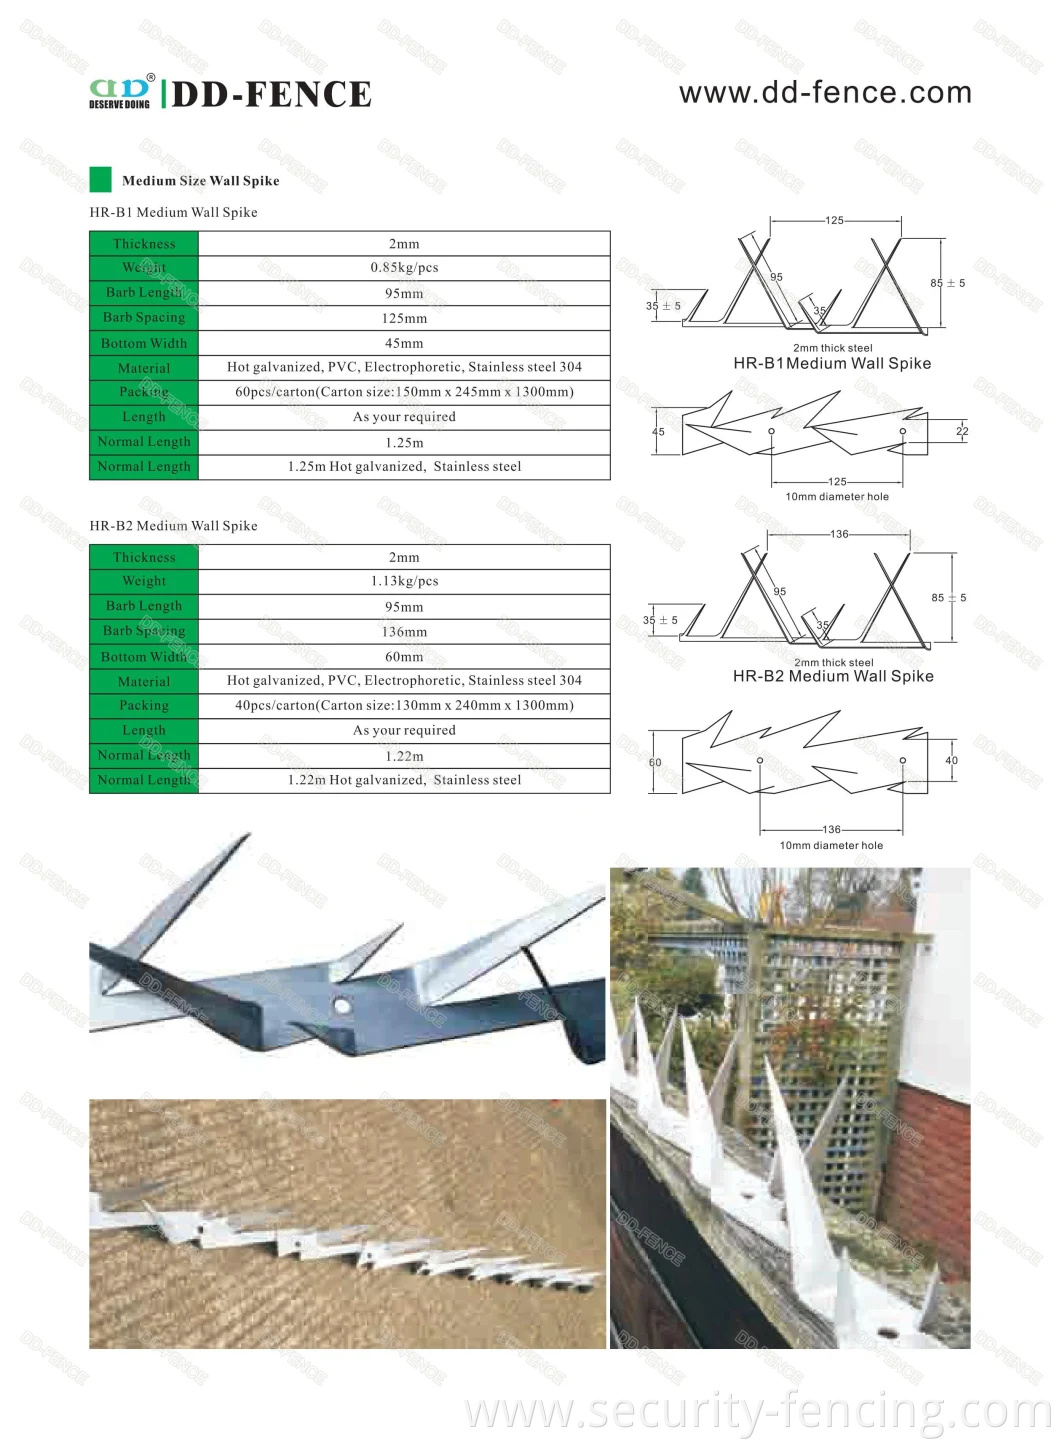 Wall Spike for High Security Fence with Perimeter Boundary Security